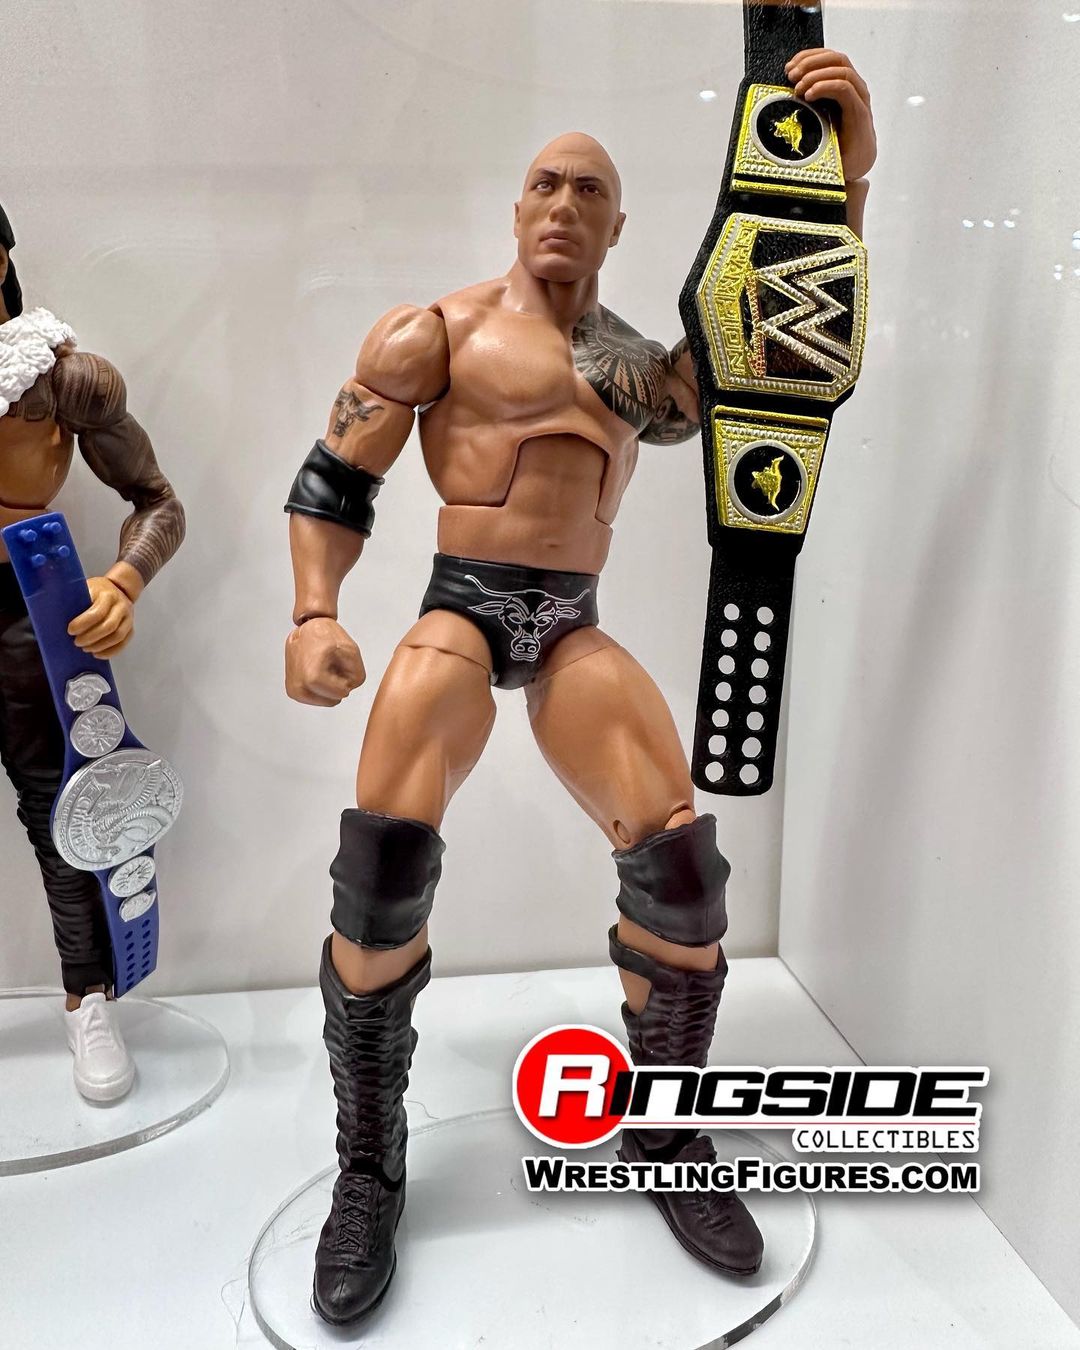 WWE Action Figure The Rock with Ringside Battle Accessories